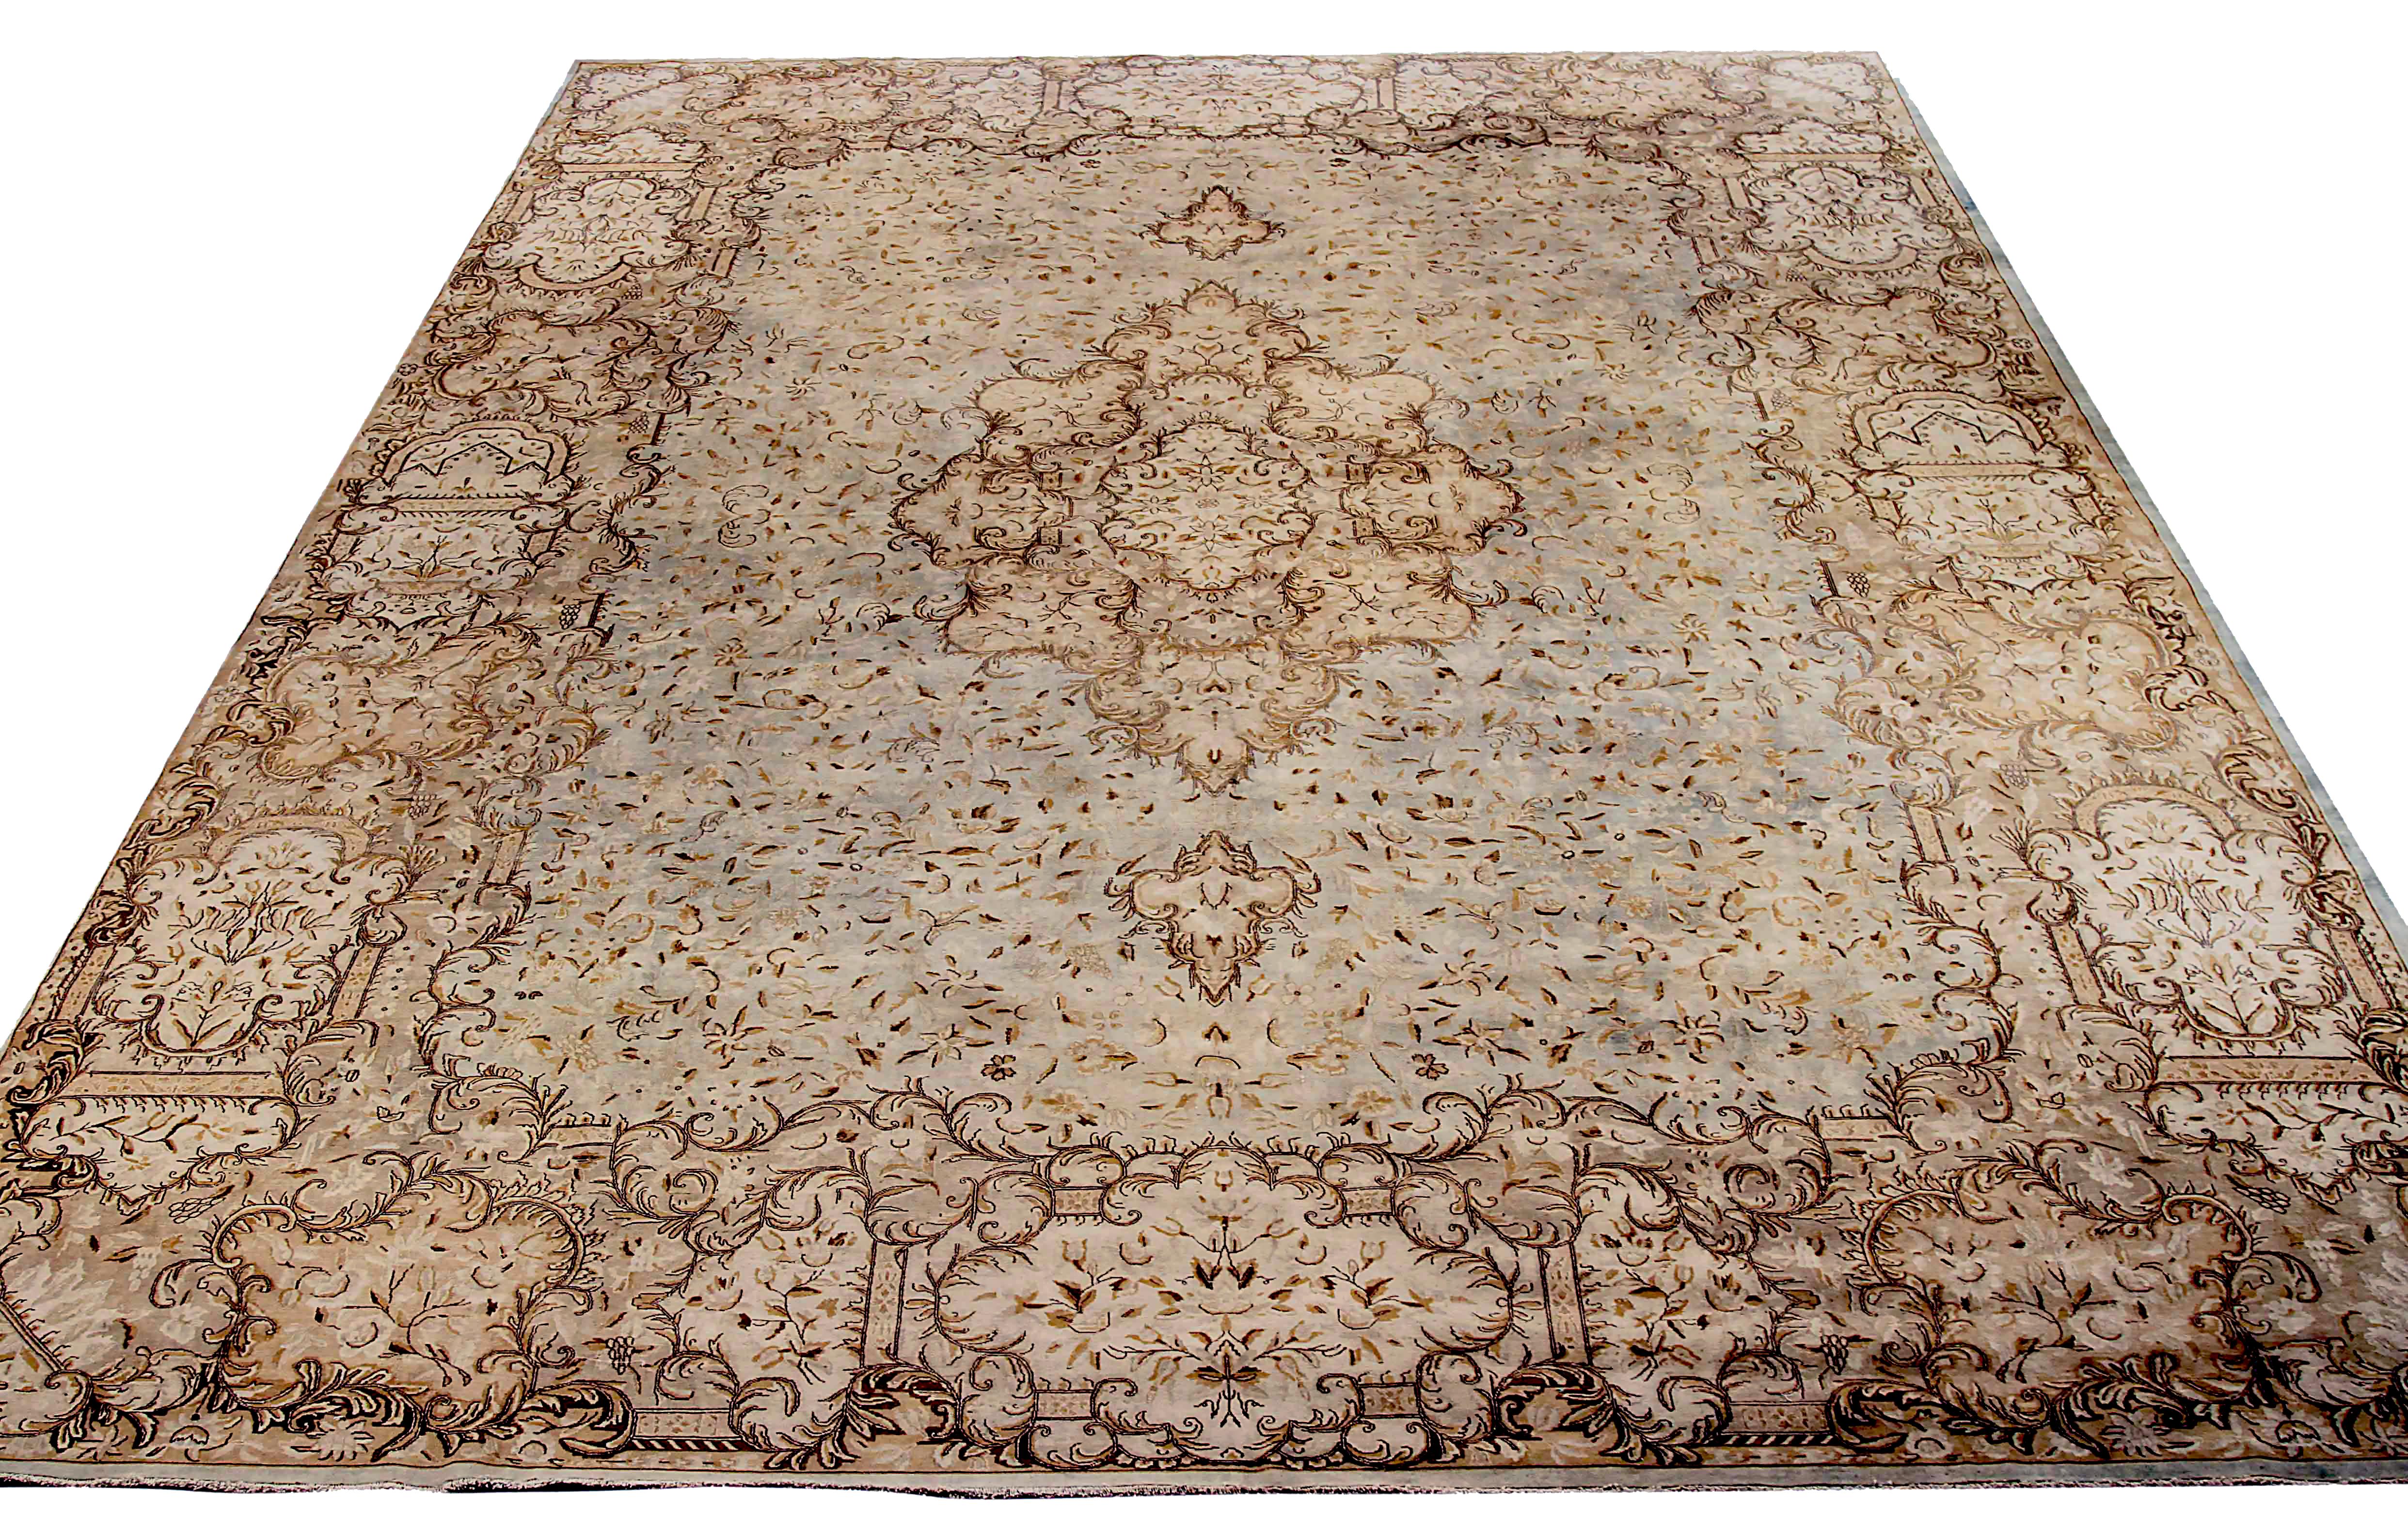 Antique Persian area rug handwoven from the finest sheep’s wool. It’s colored with all-natural vegetable dyes that are safe for humans and pets. It’s a traditional Kerman design handwoven by expert artisans. It’s a lovely area rug that can be